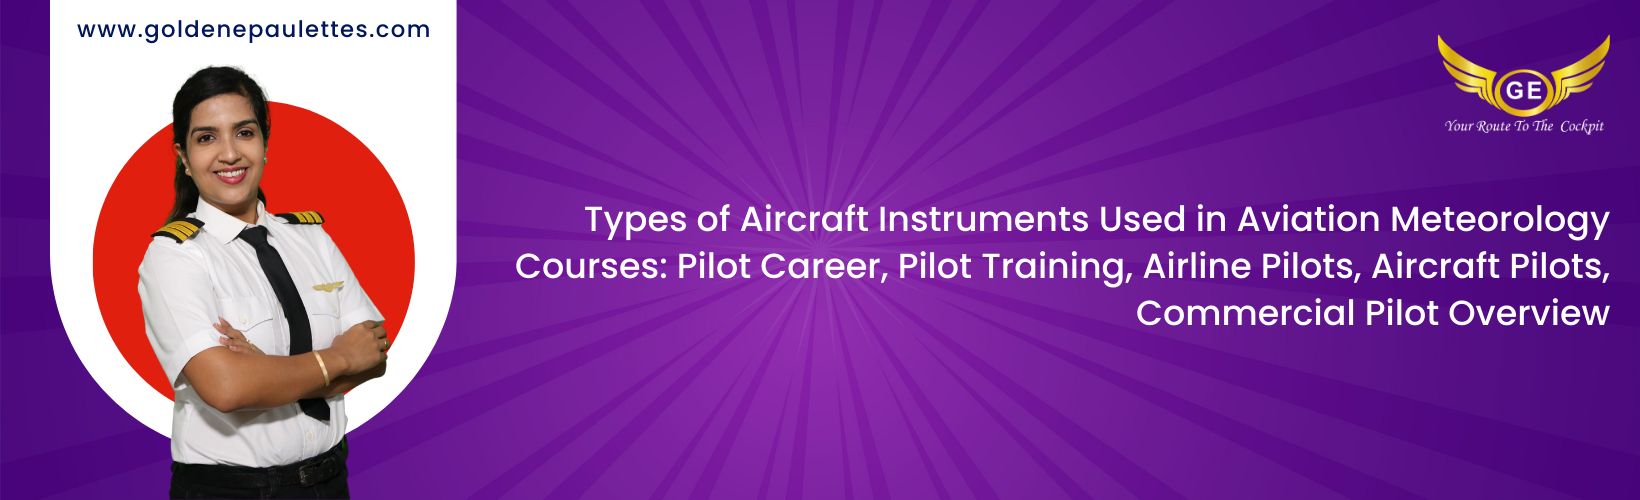 Types of Aircraft Instruments Used in Aviation Meteorology Courses